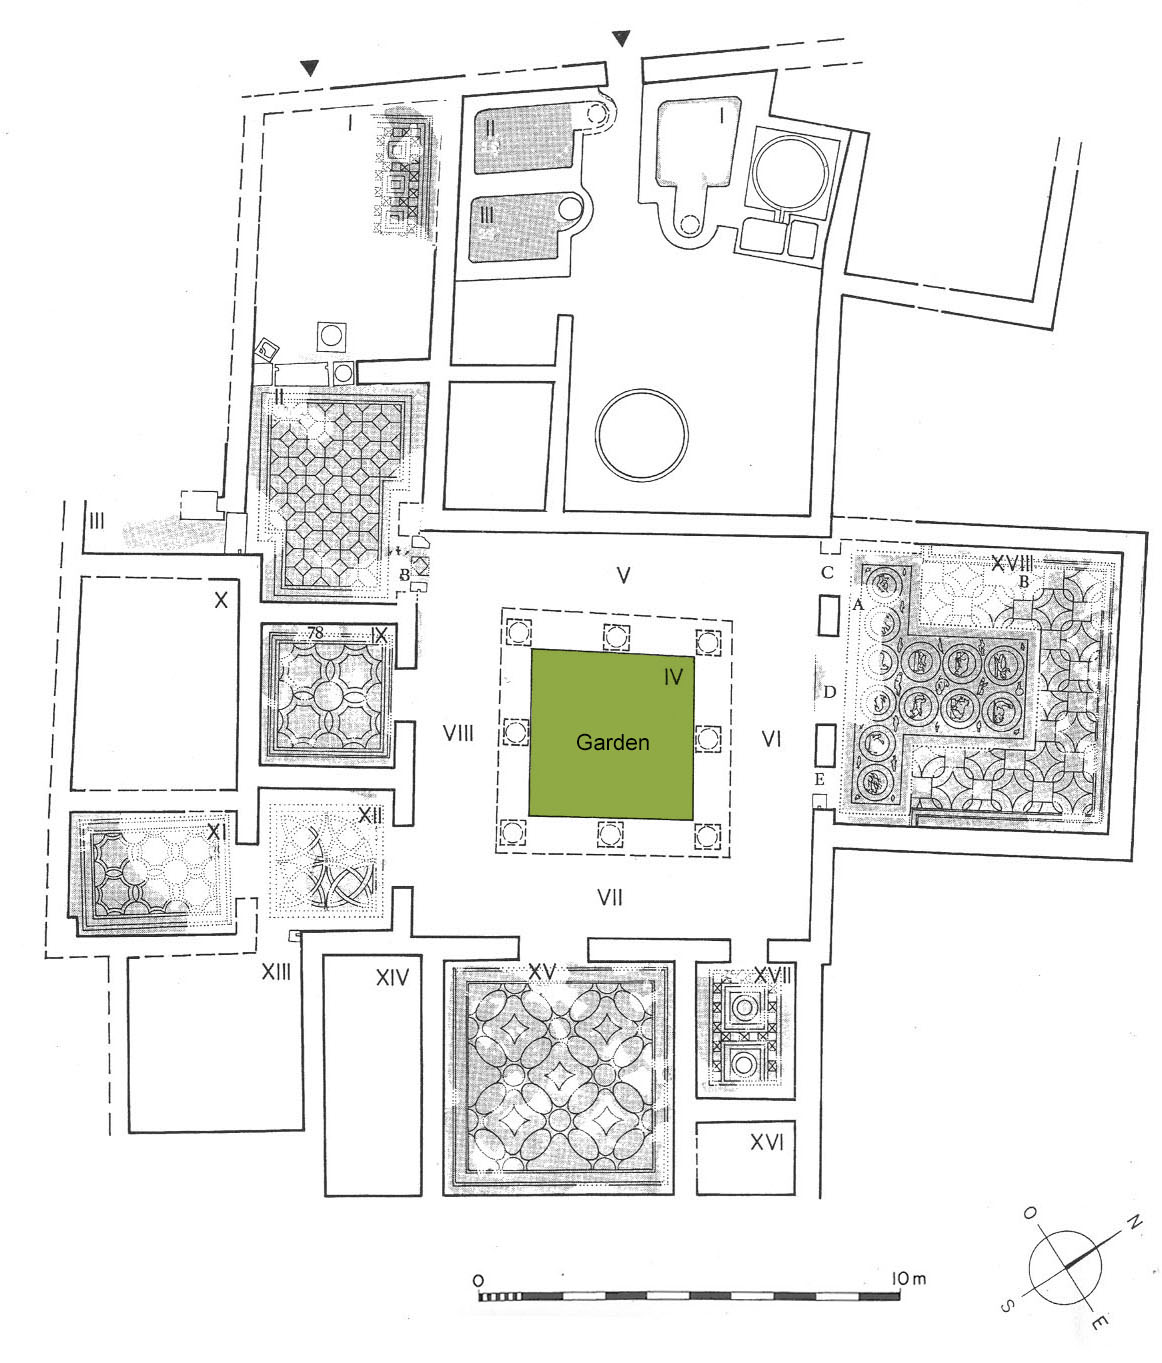 Plan of the House of the Trussed Animals